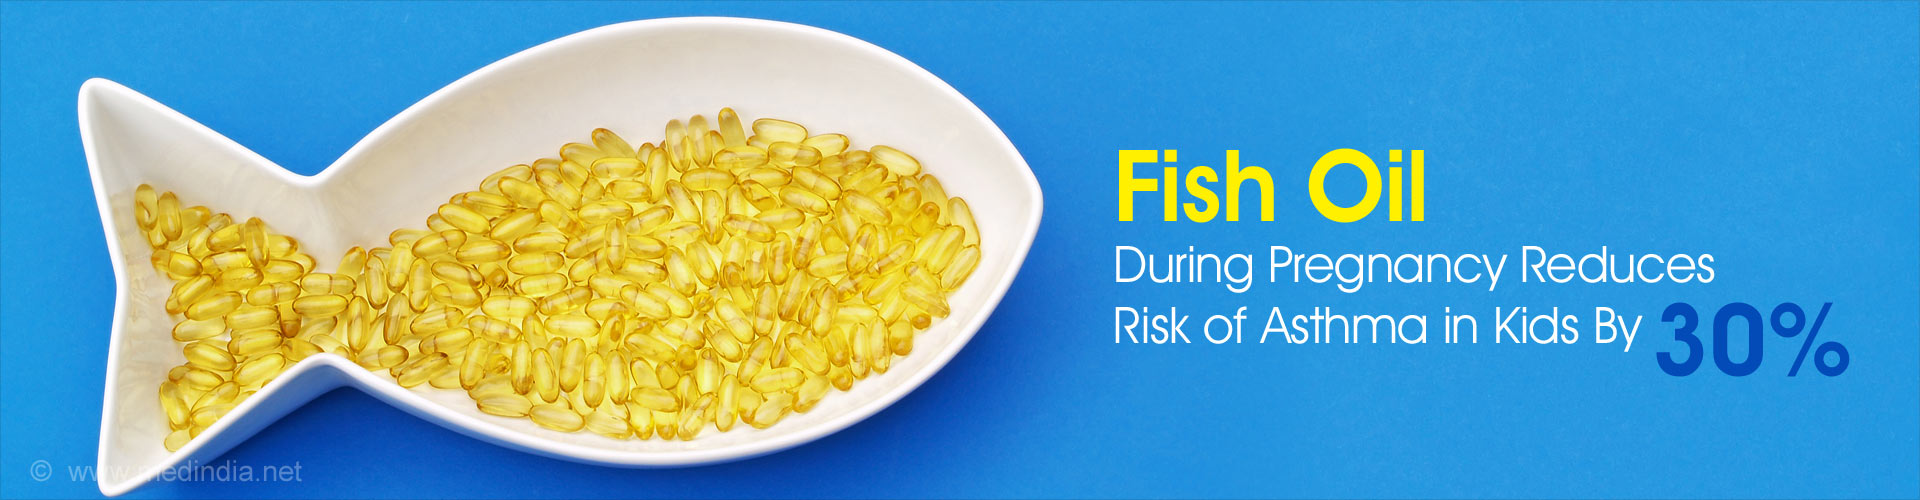 Fish Oil During Pregnancy Reduces Risk of Asthma in Kids by 30%